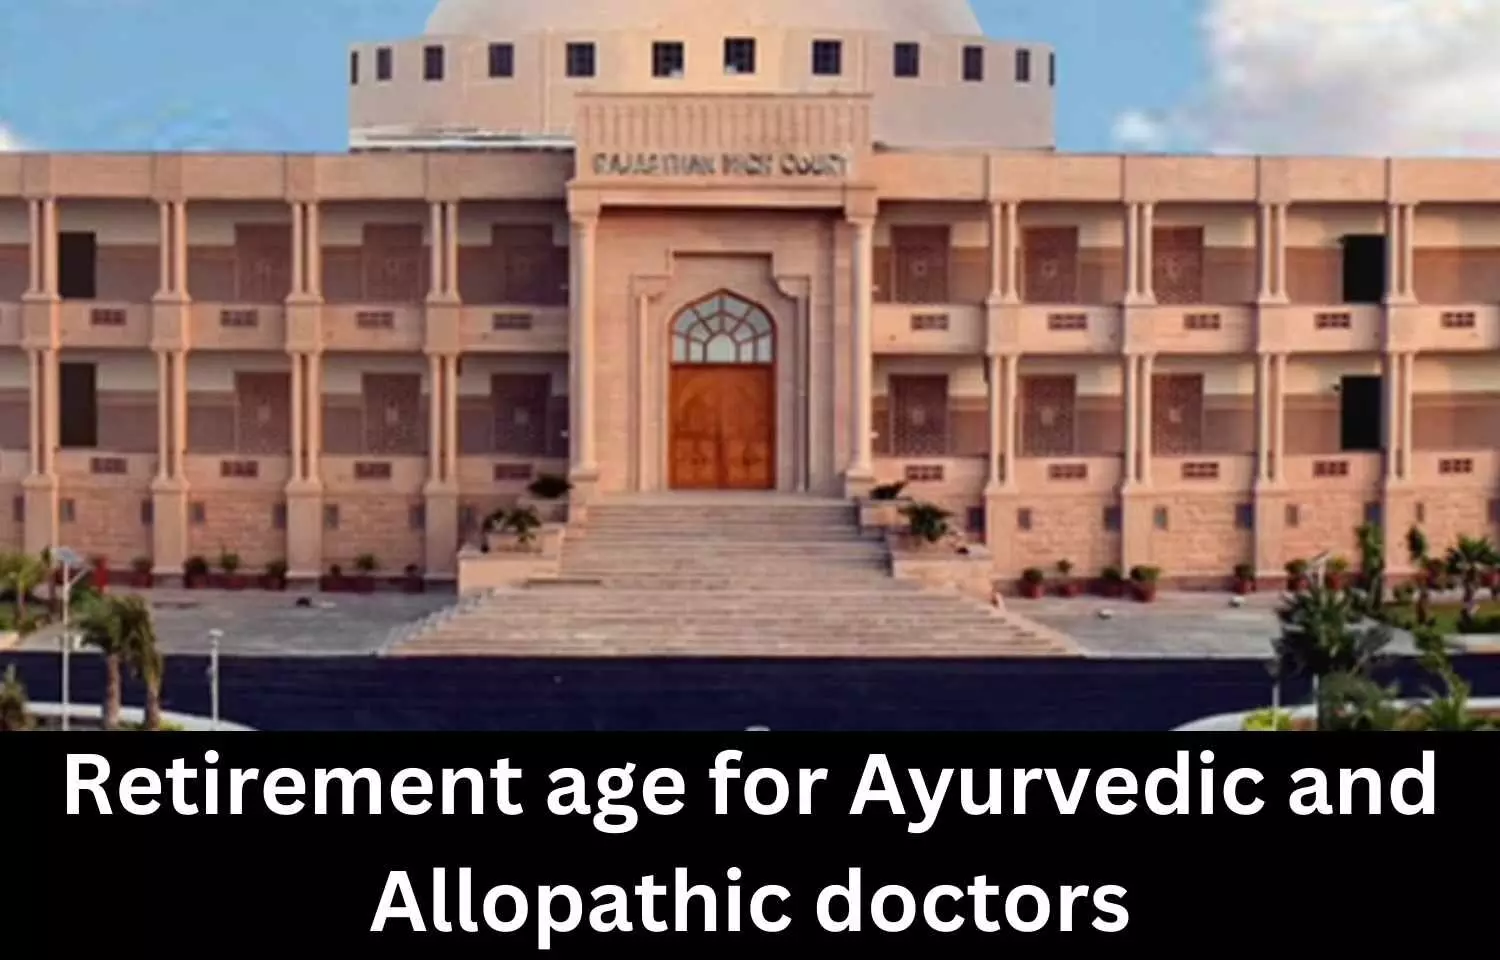 Different retirement age for ayurvedic, allopathic doctors unconstitutional: Rajasthan HC